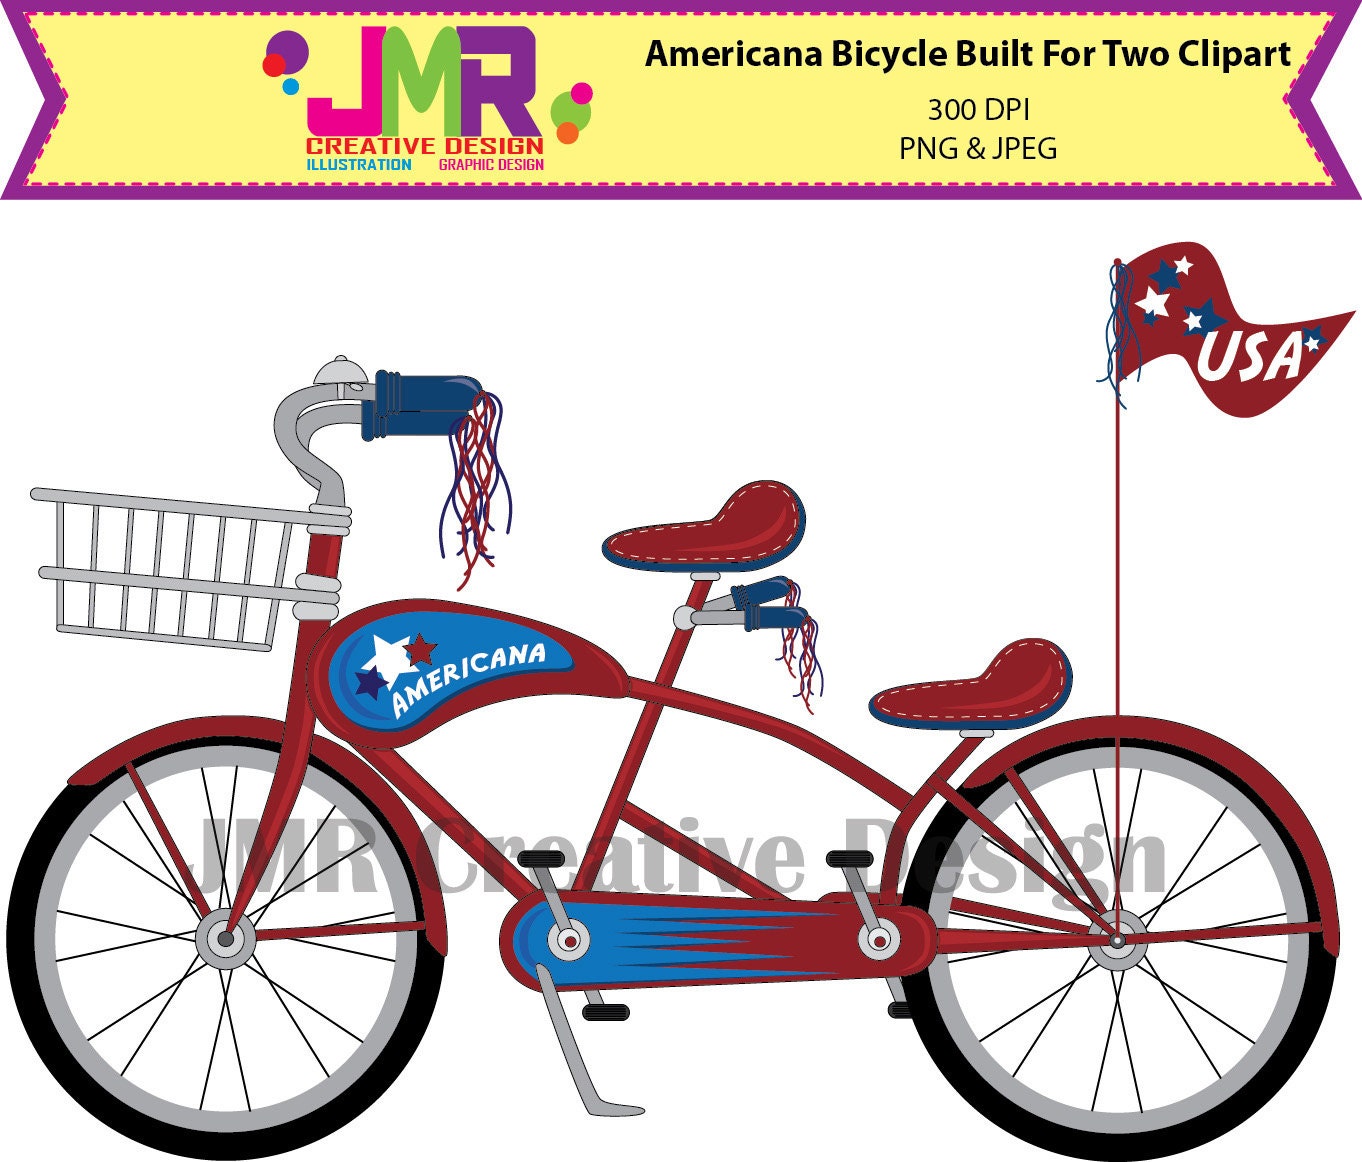 bicycle built for two clipart - photo #40